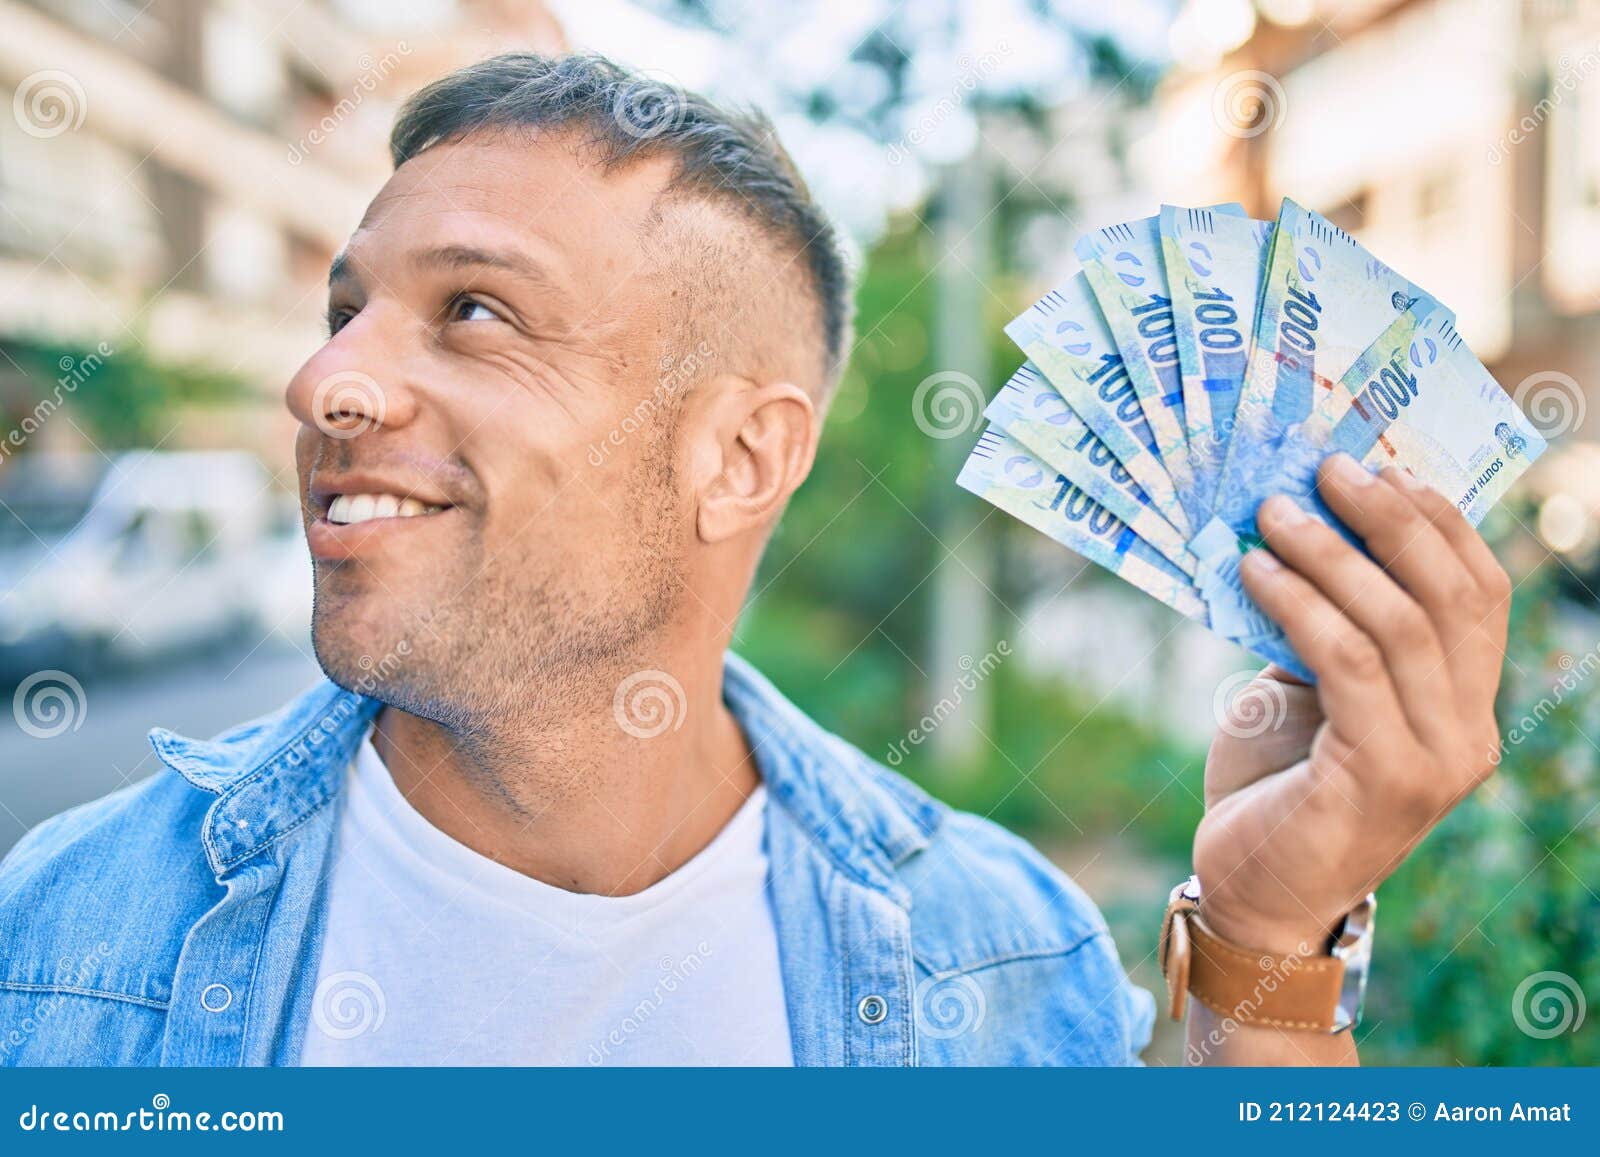 young caucasian man smiling happy holding south african rands banknotes standing at the city